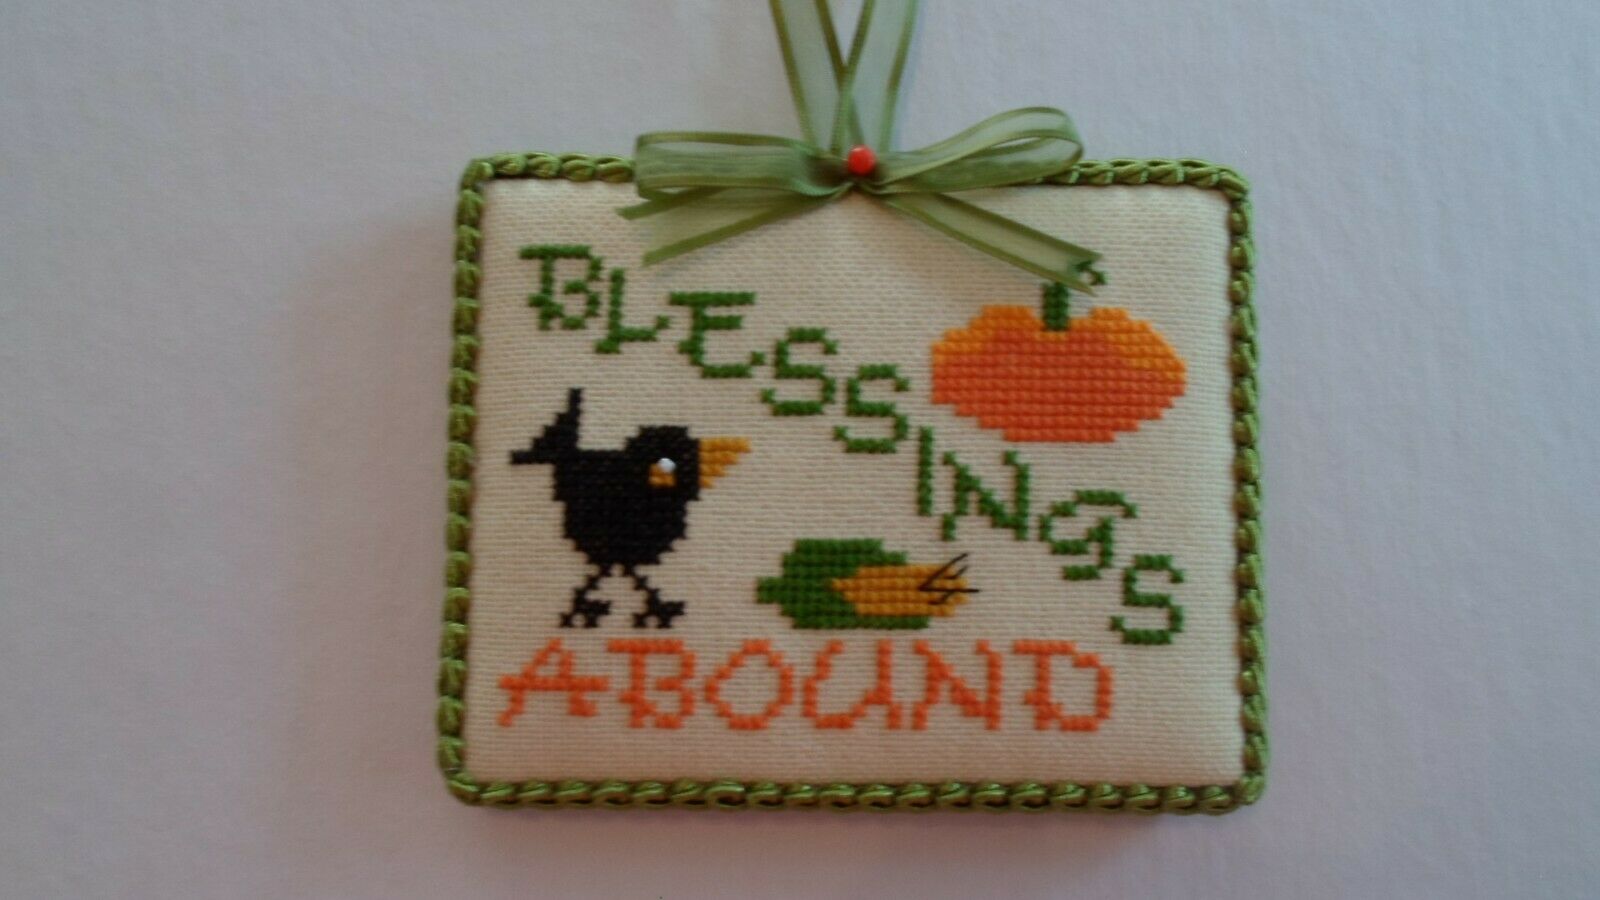 Handmade Counted Cross Stitch For Fall Or Halloween - "blessings Around"